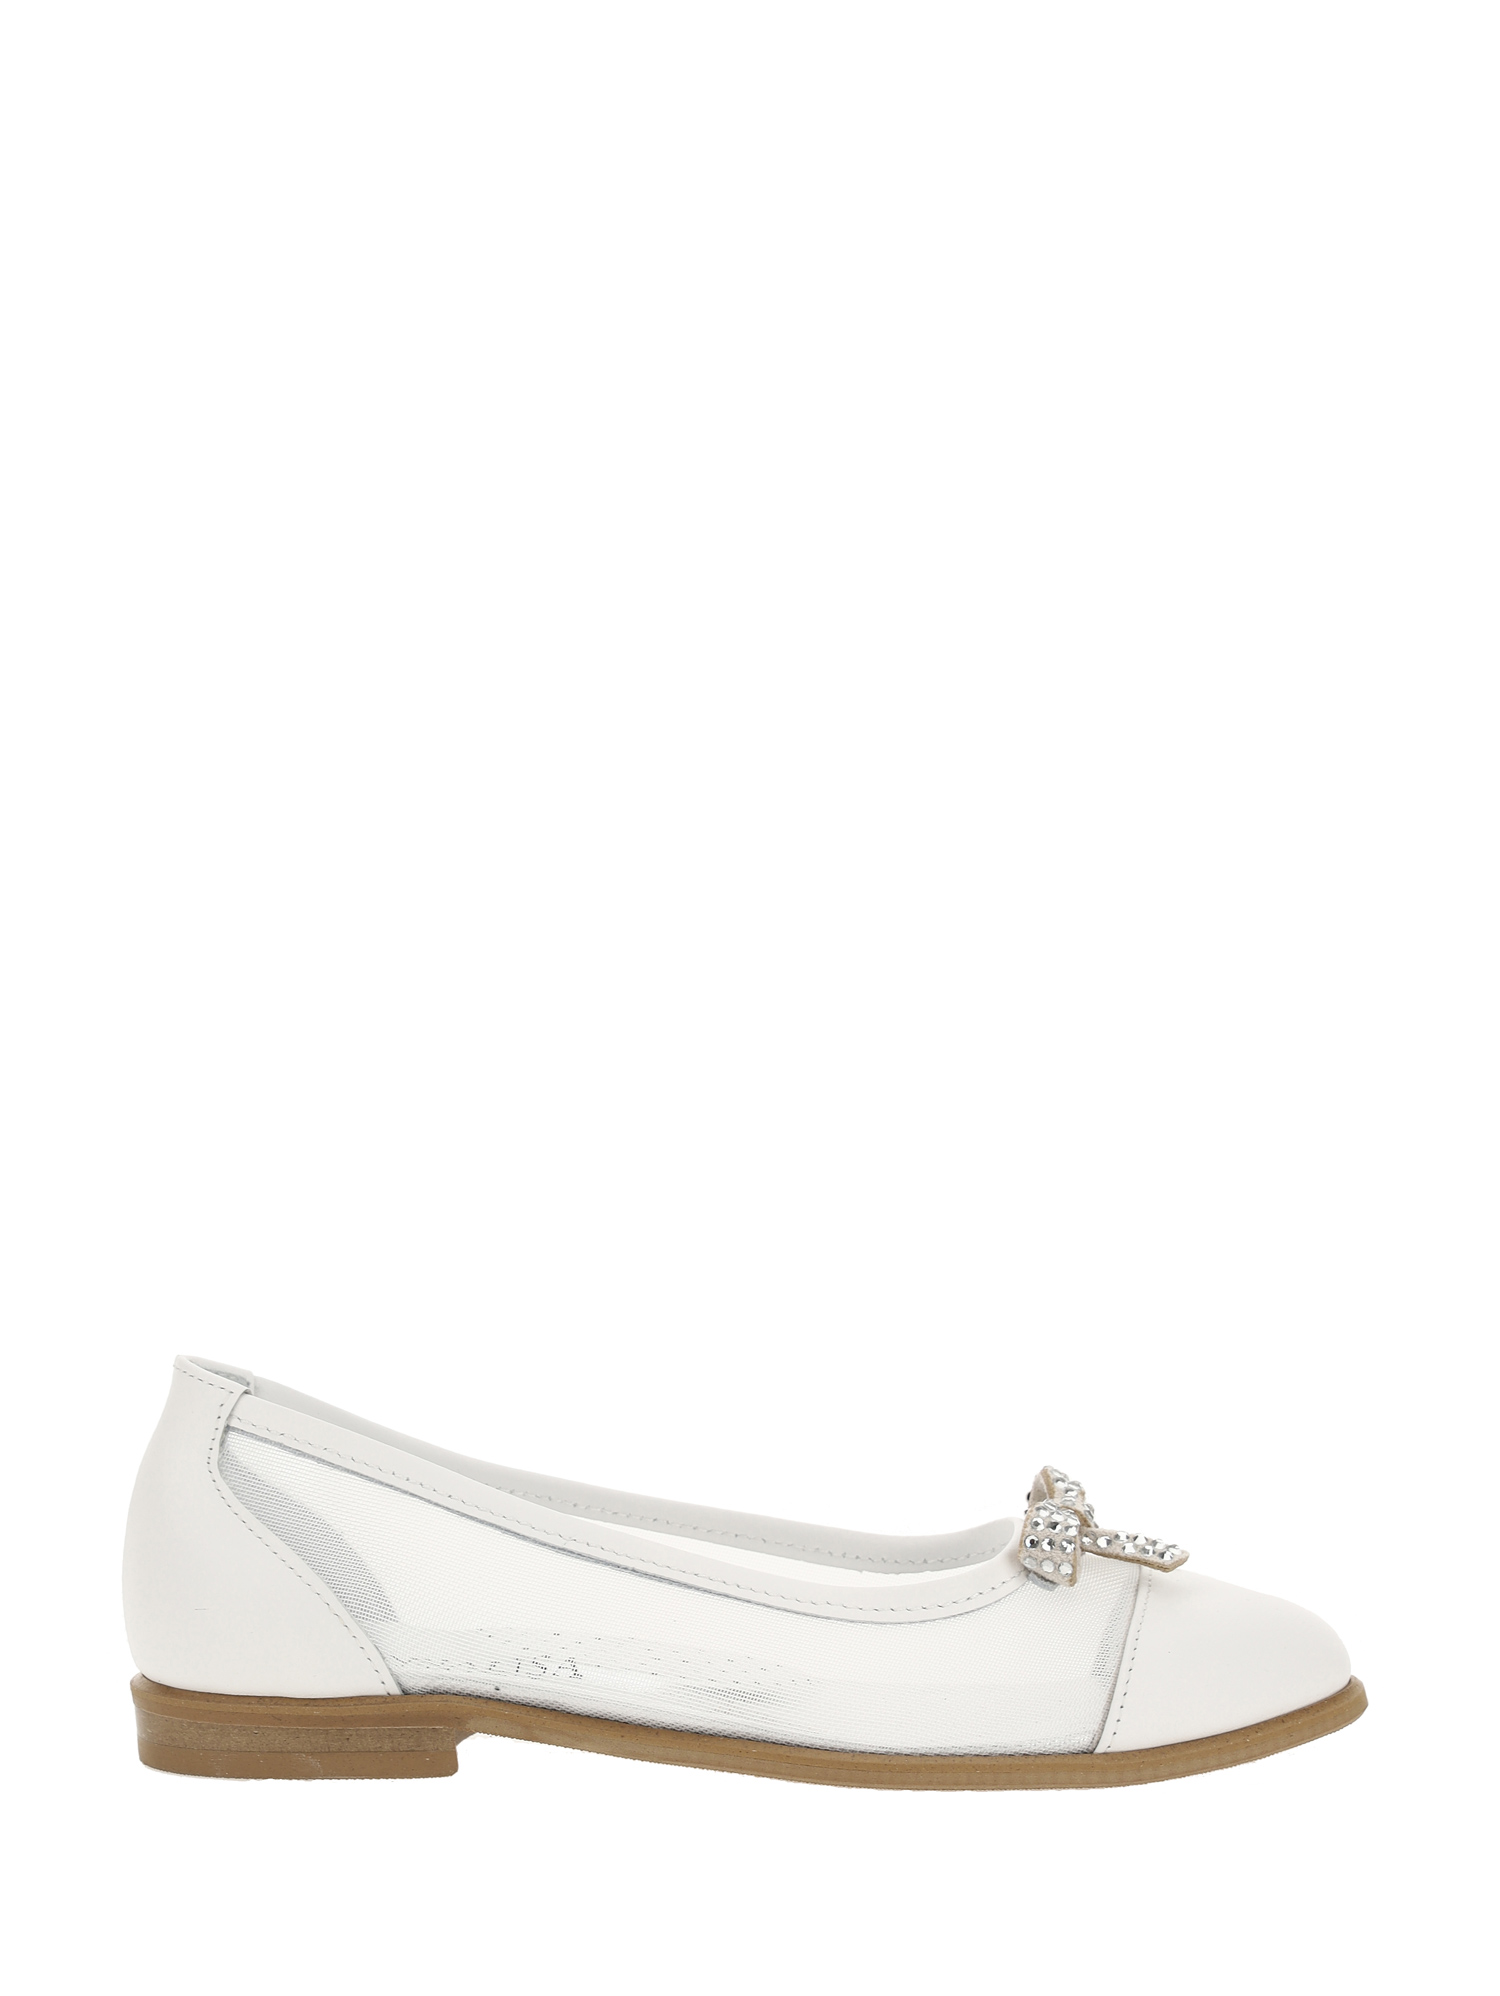 Monnalisa Leather Ballet Flats With Rhinestone Bow In Cream